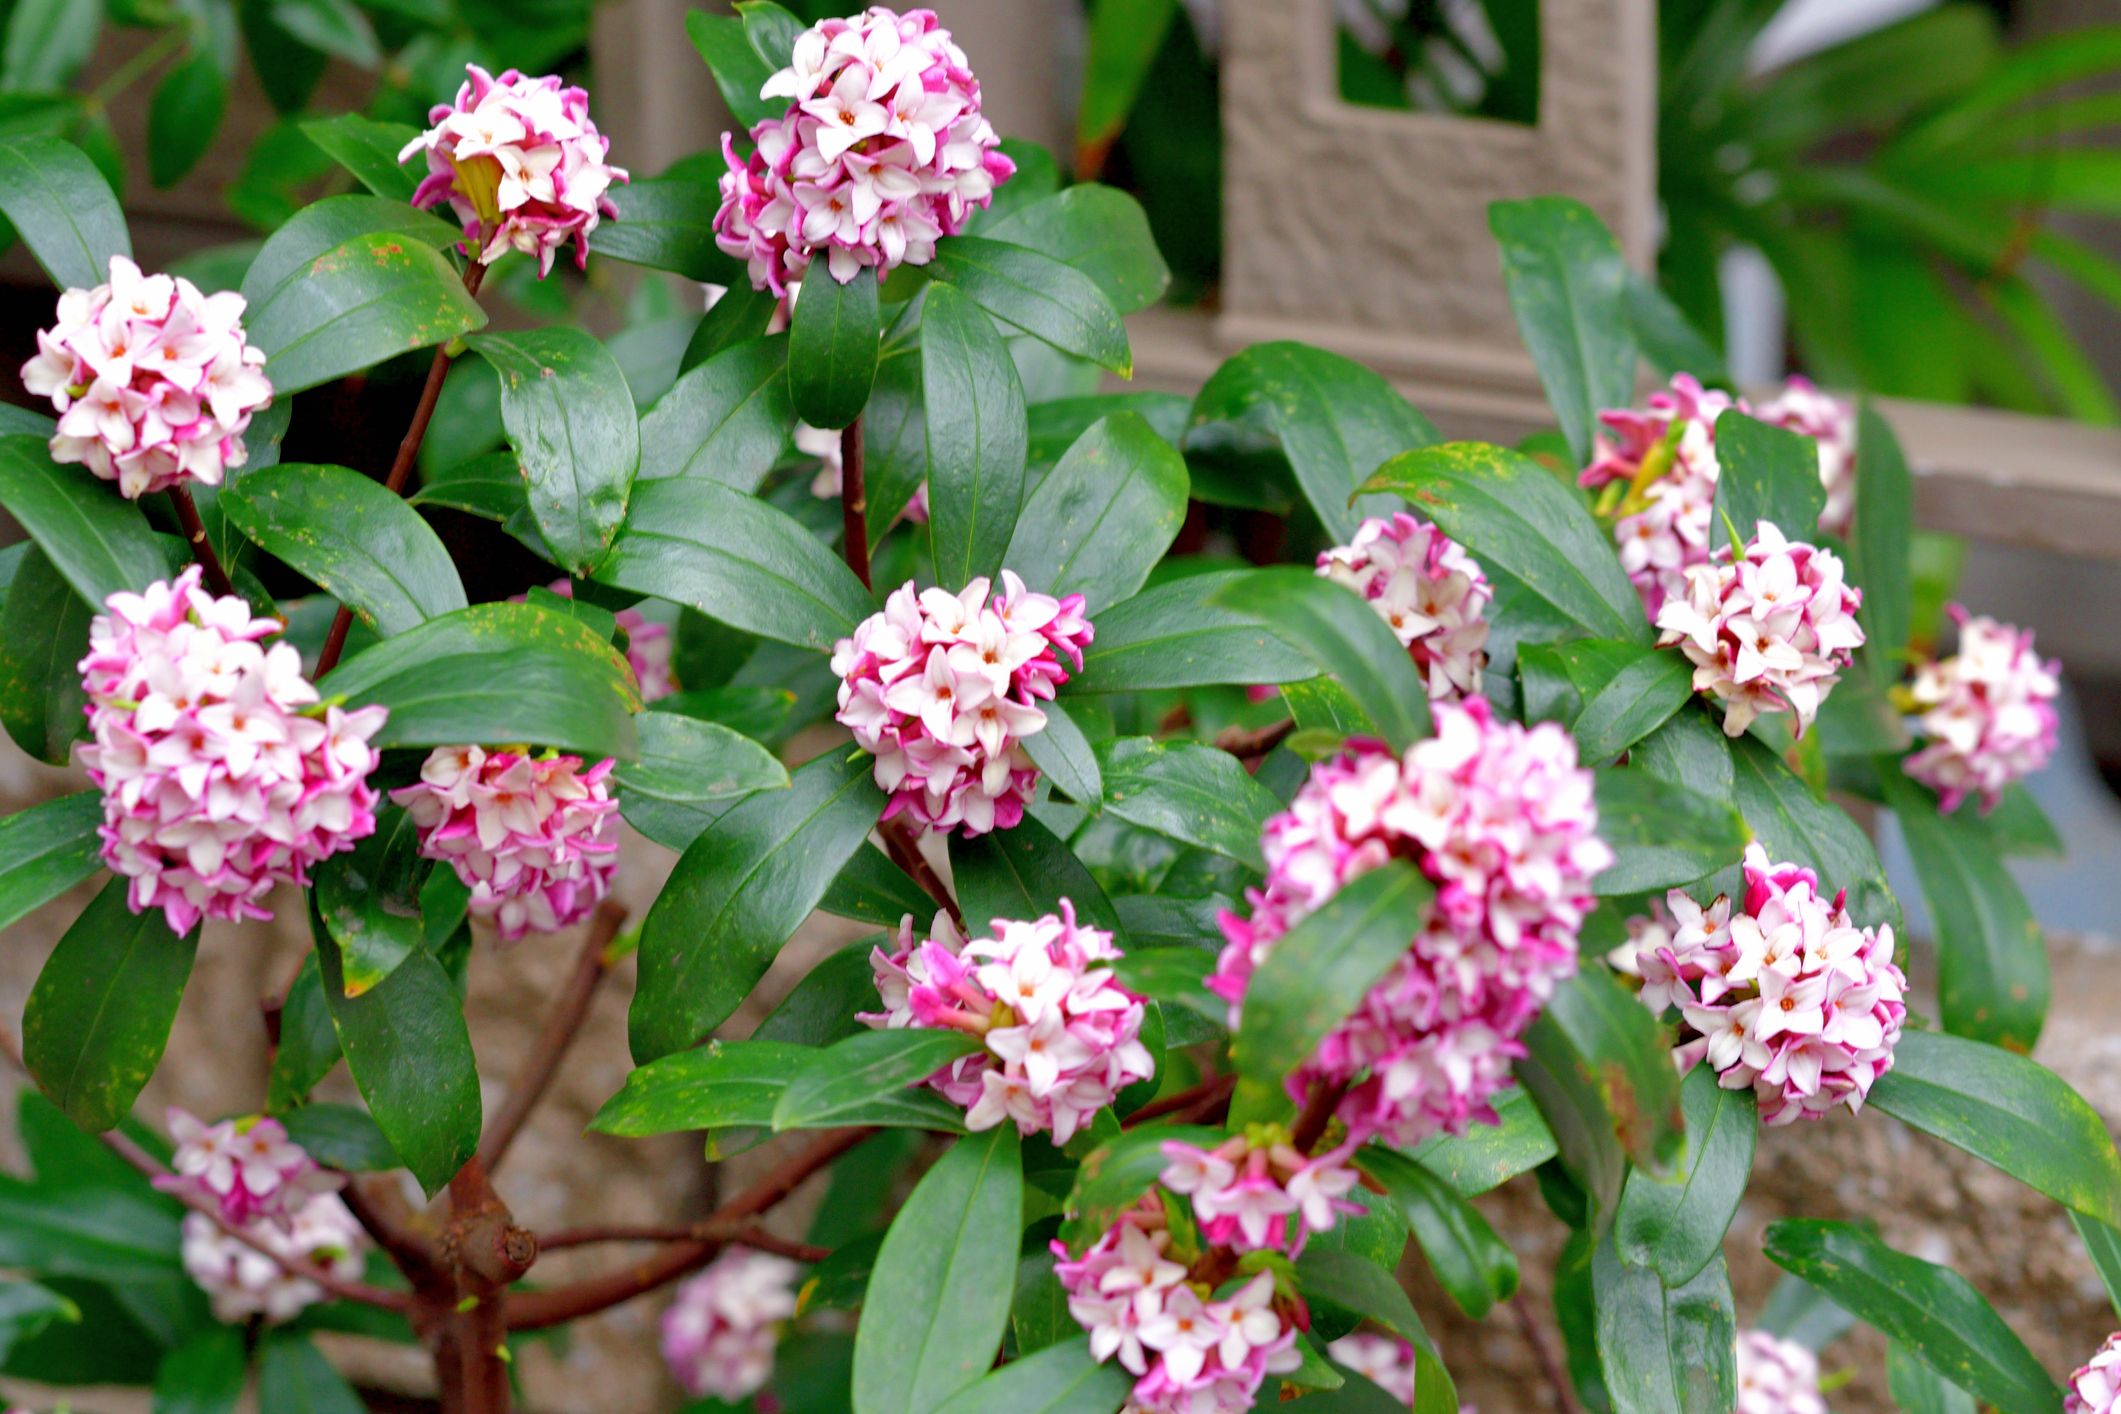 Winter-Flowering Plants That Will Add Color To Your Yard